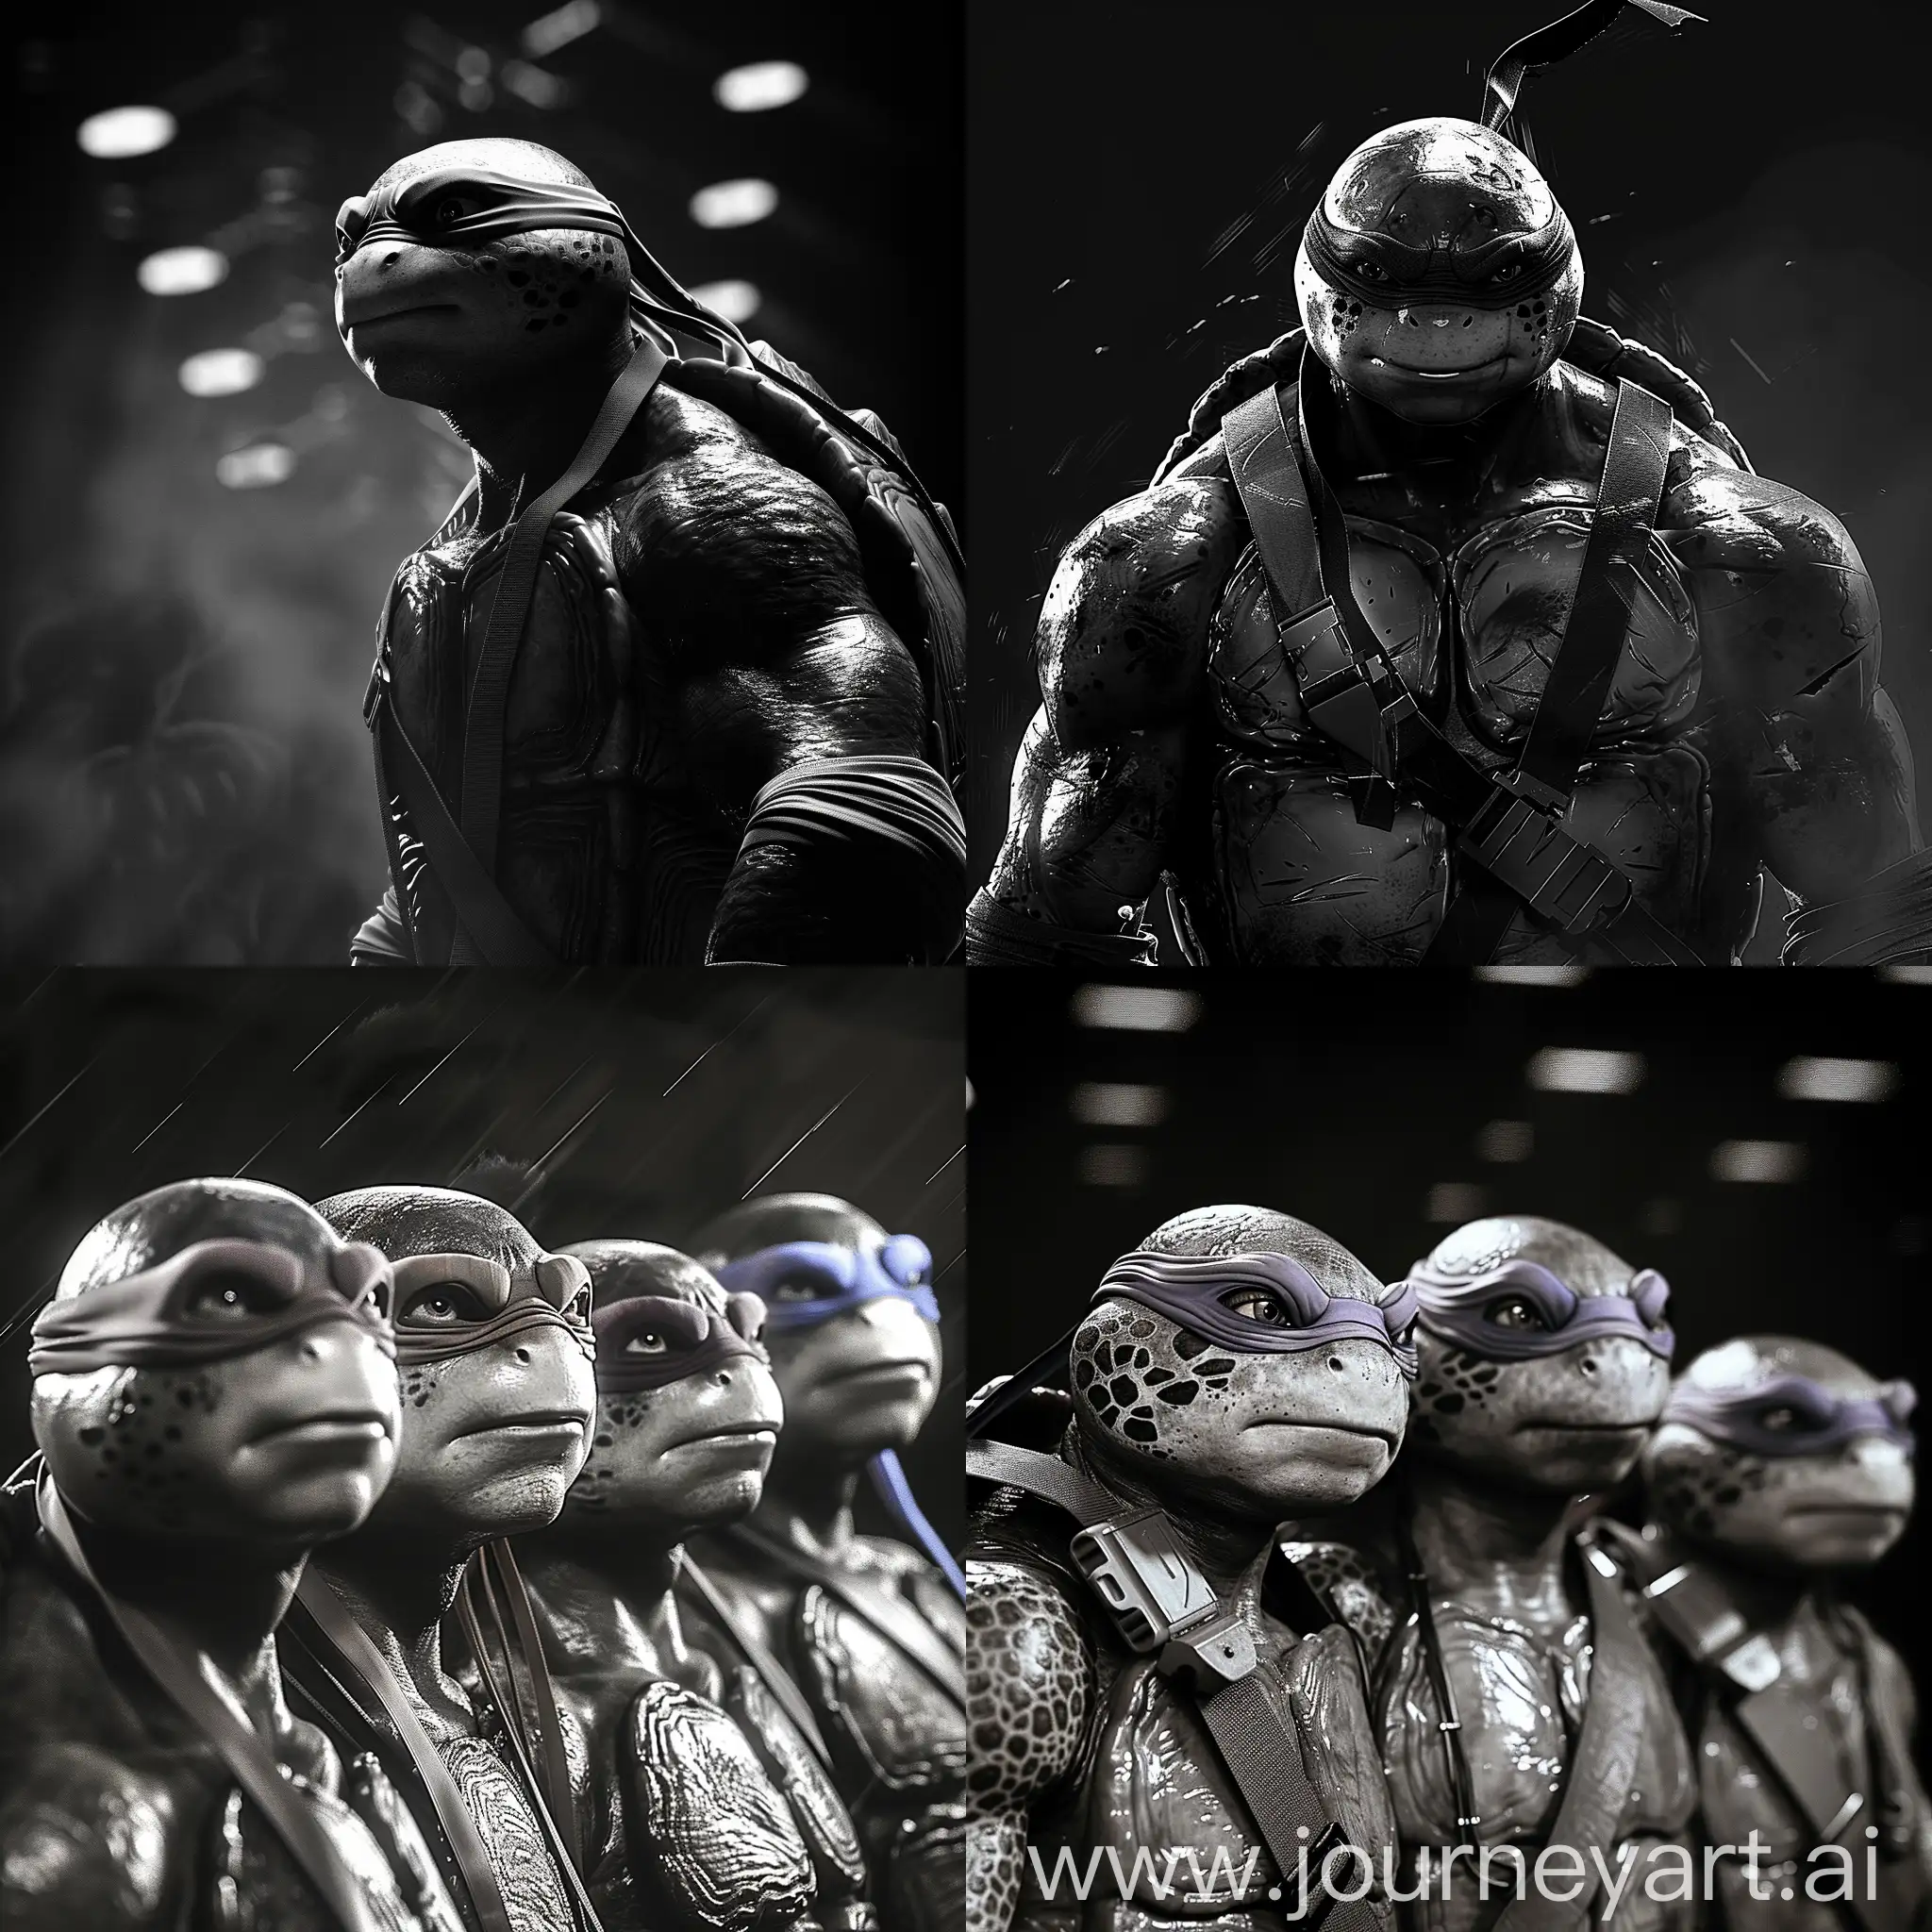 cyber Ninja turtles wallpapers in black and white